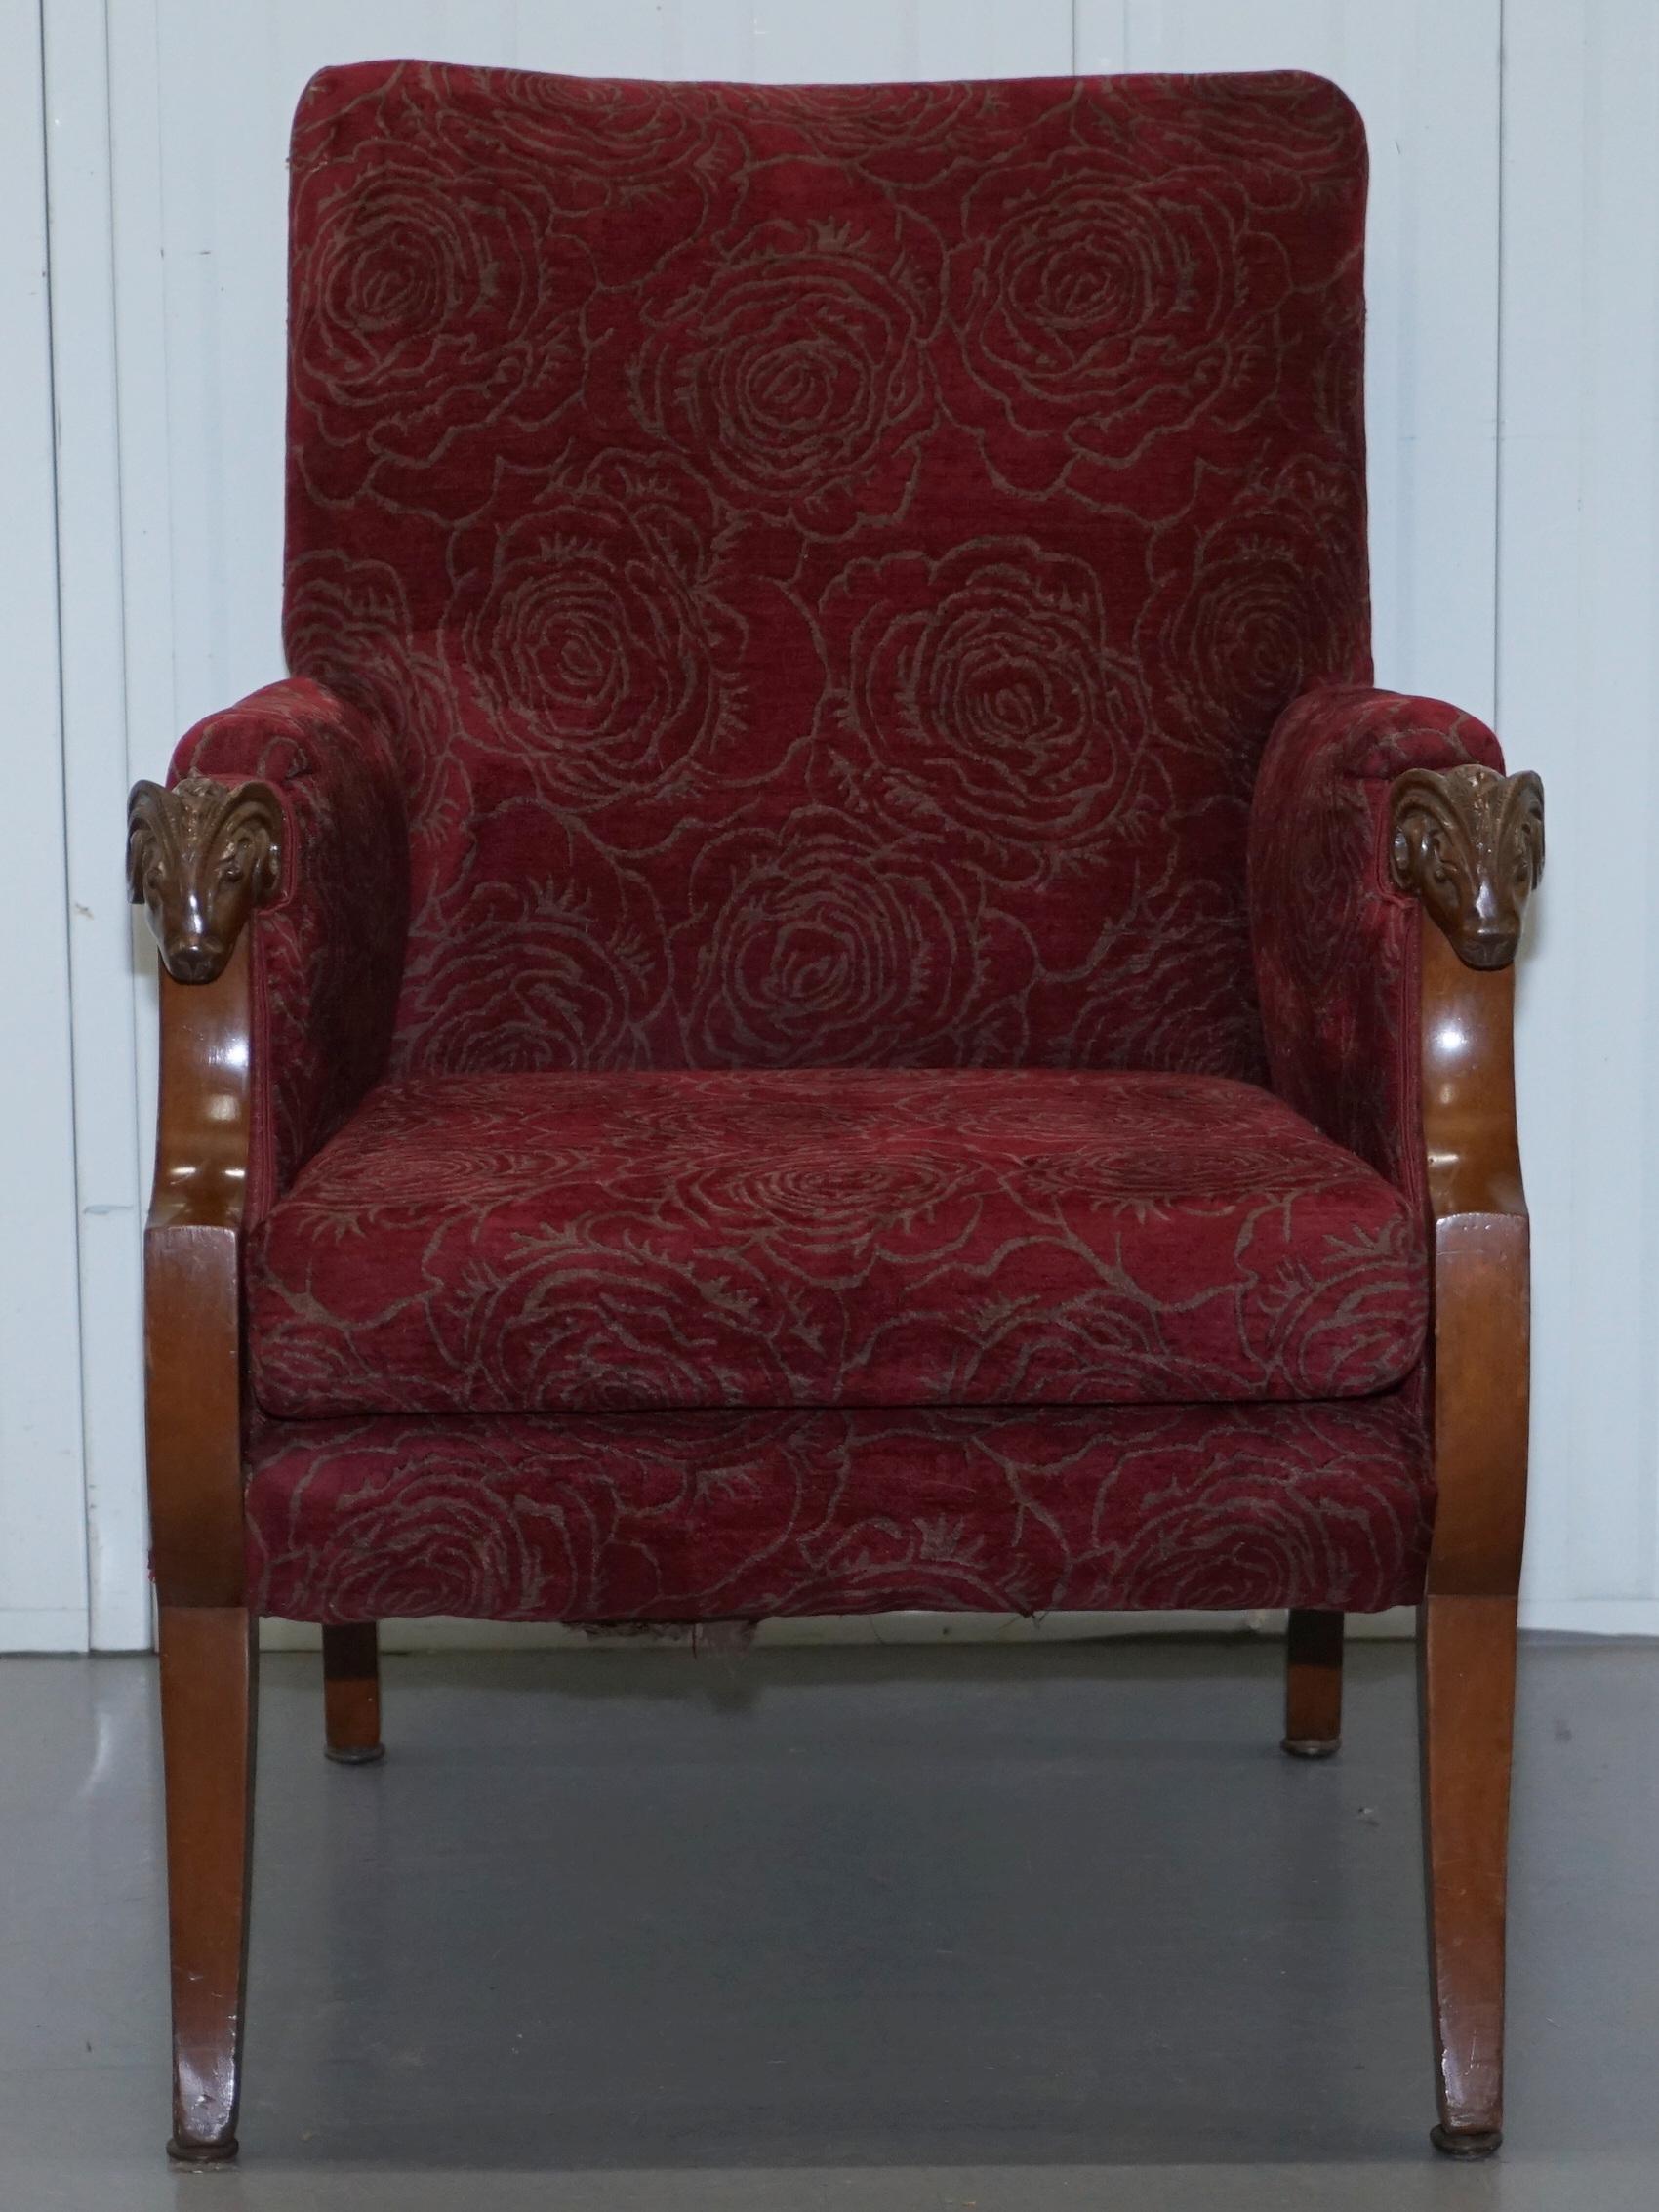 We are delighted to this lovely vintage rams head armchair with red floral upholstery

This chair is in fine order, the upholstery has been professionally cleaned, the timber cleaned waxed and polished

It’s a very comfortable and fantastic